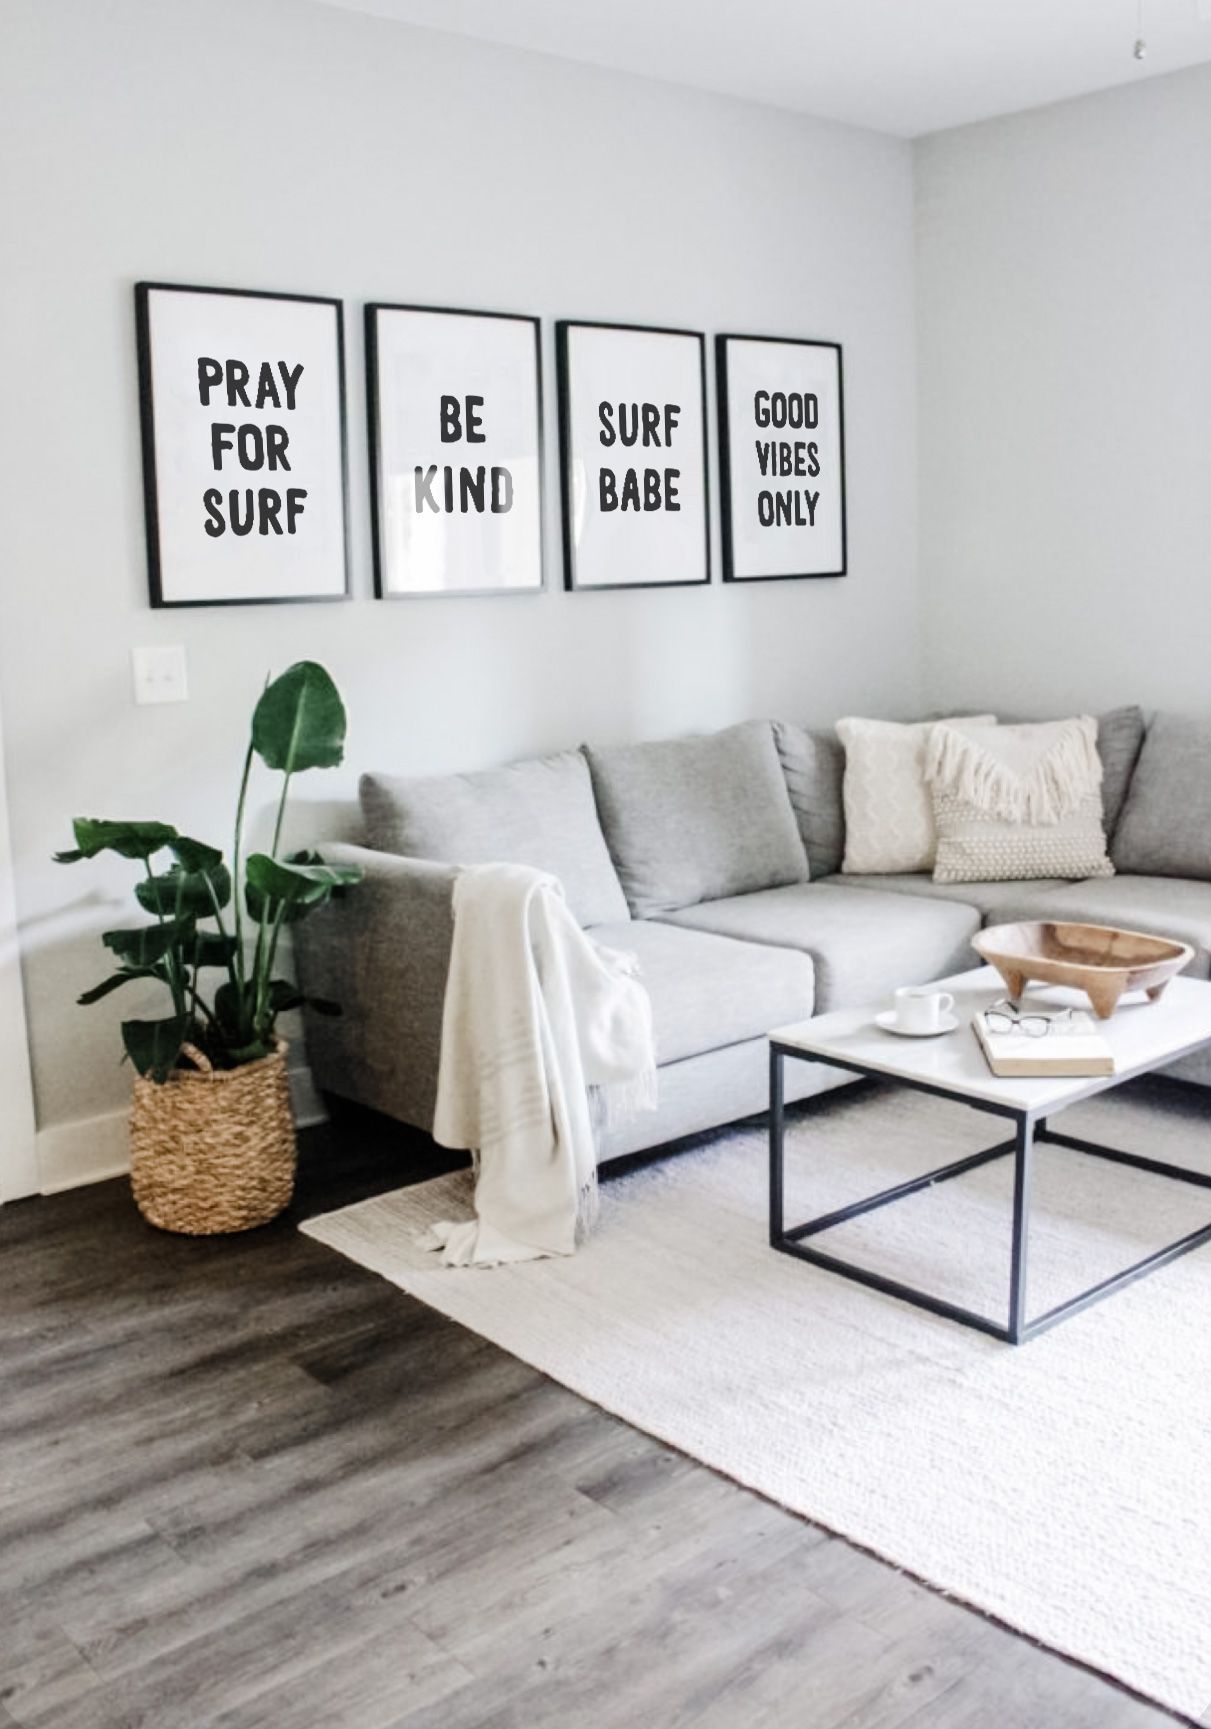 pray for surf, be kind, surf babe, good vibes only, grey living room coastal living decor ideas - pray for surf, be kind, surf babe, good vibes only, grey living room coastal living decor ideas -   15 home decor for cheap living room ideas